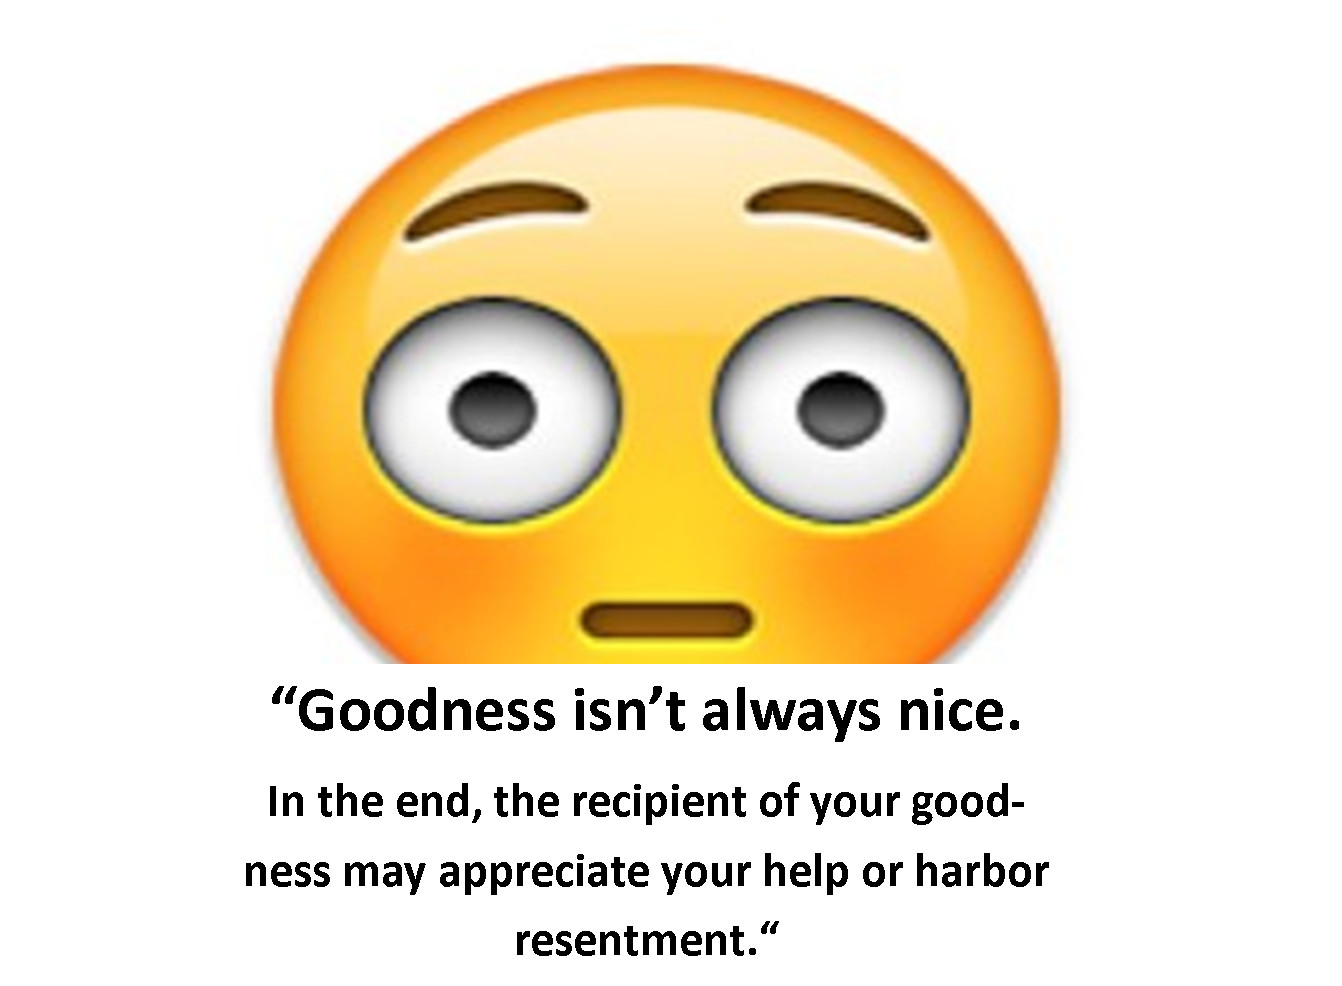 Nice Vs Good: Right Or Wrong Or Depends